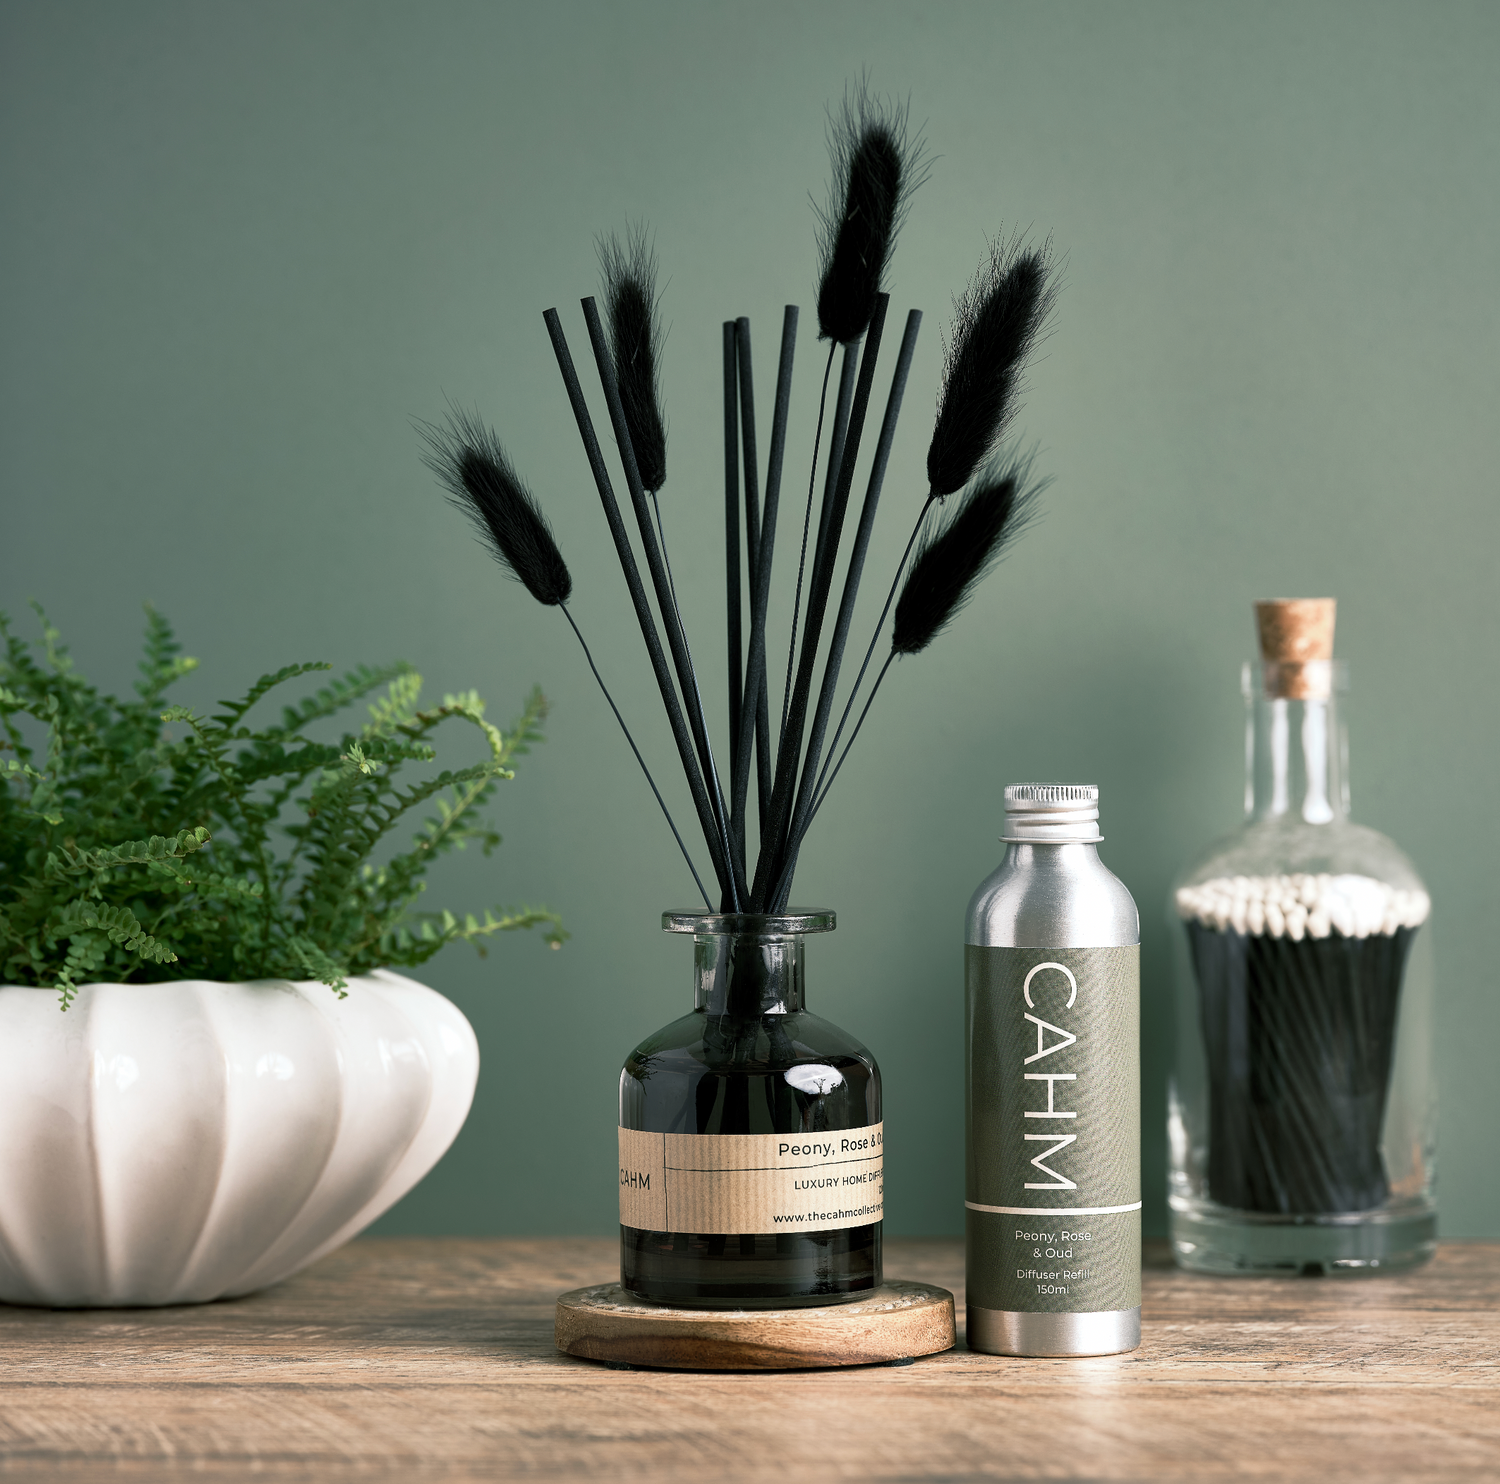 Black reed diffuser with bunny tails and refill